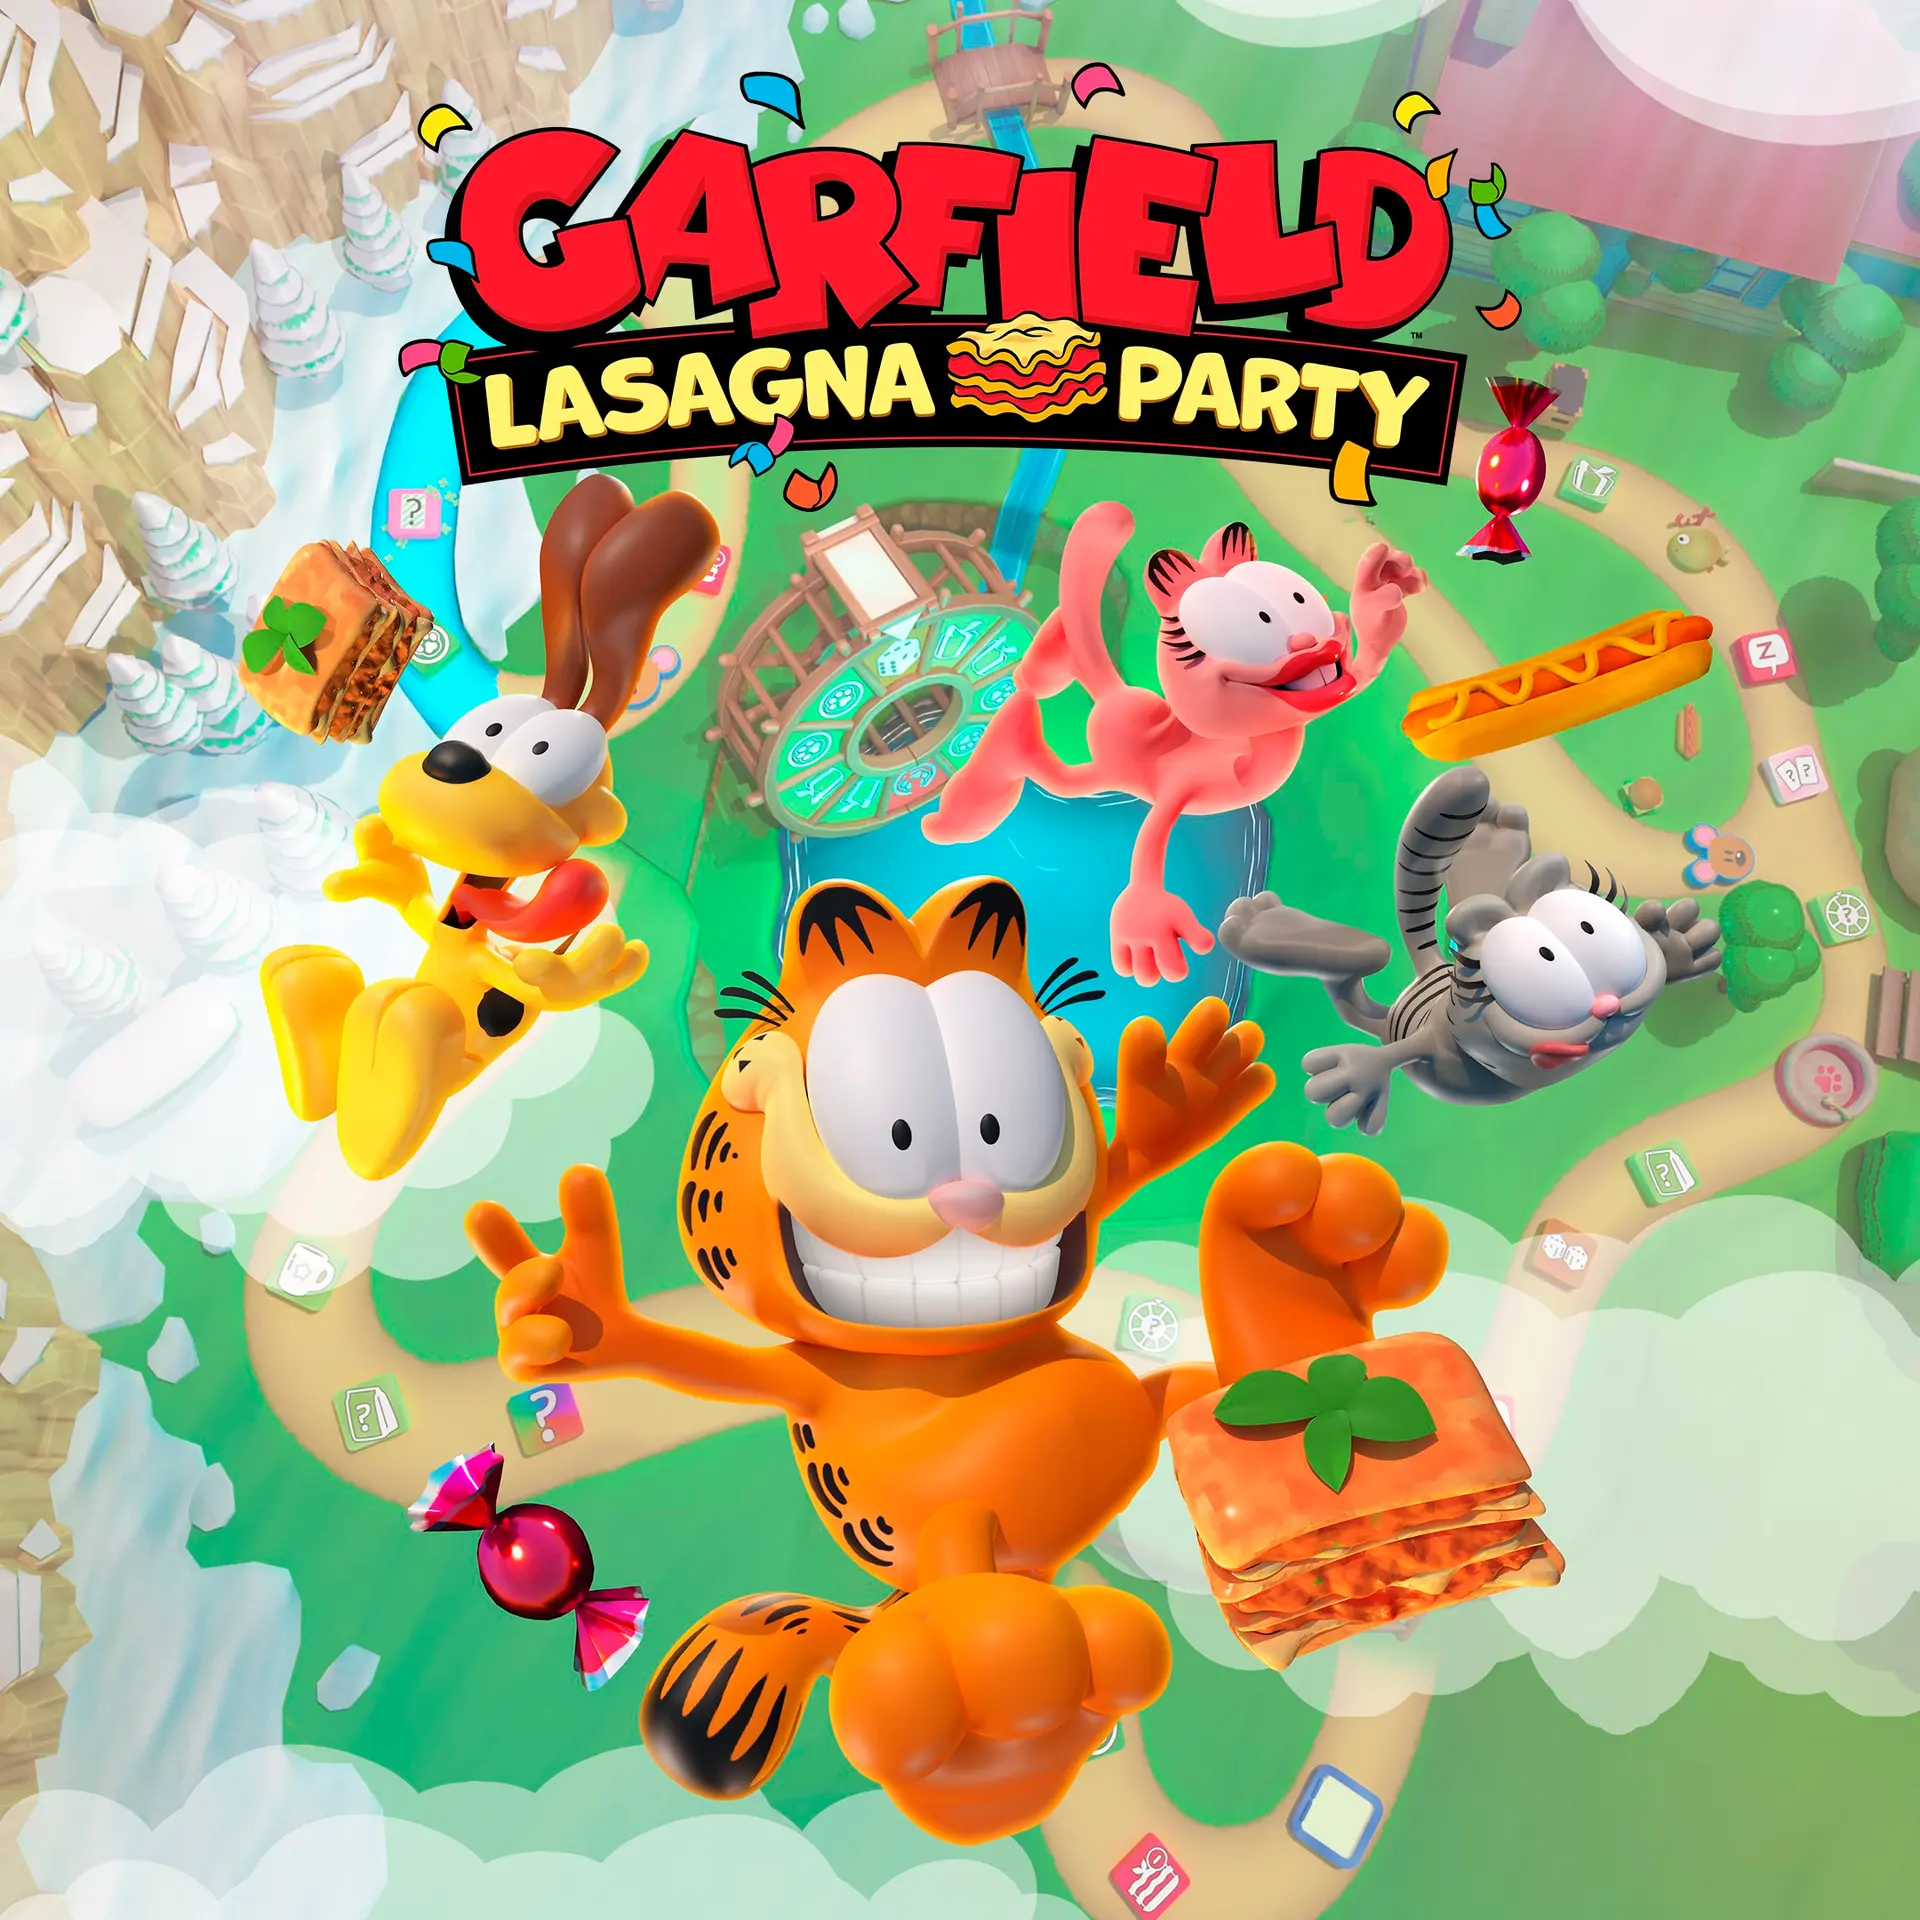 Garfield Lasagna Party (XBOX One - Cheapest Store)